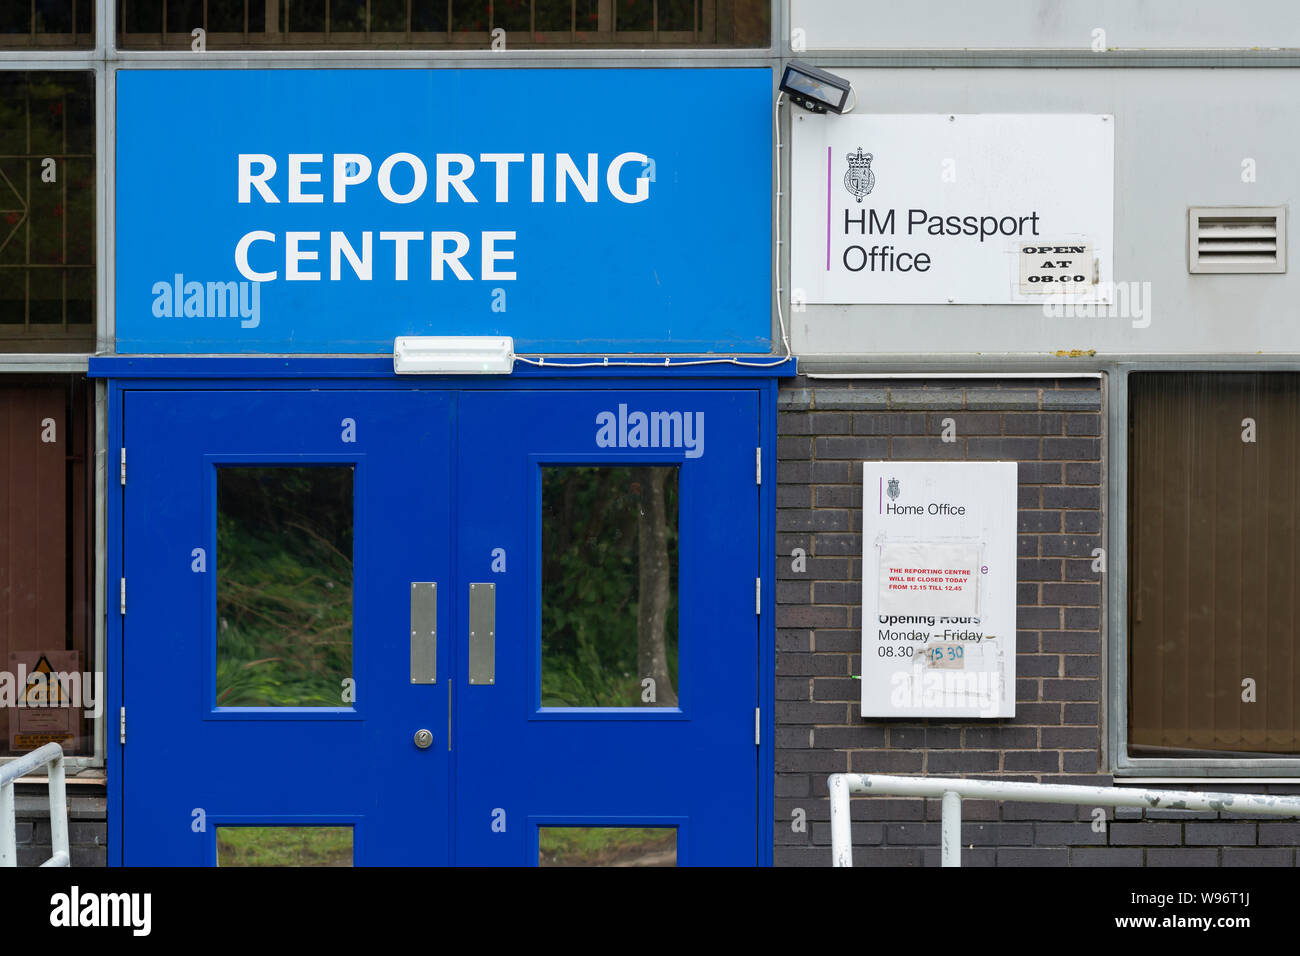 HM Passport Office and Reporting Centre based in Salford Quays, Manchester, UK. Stock Photo